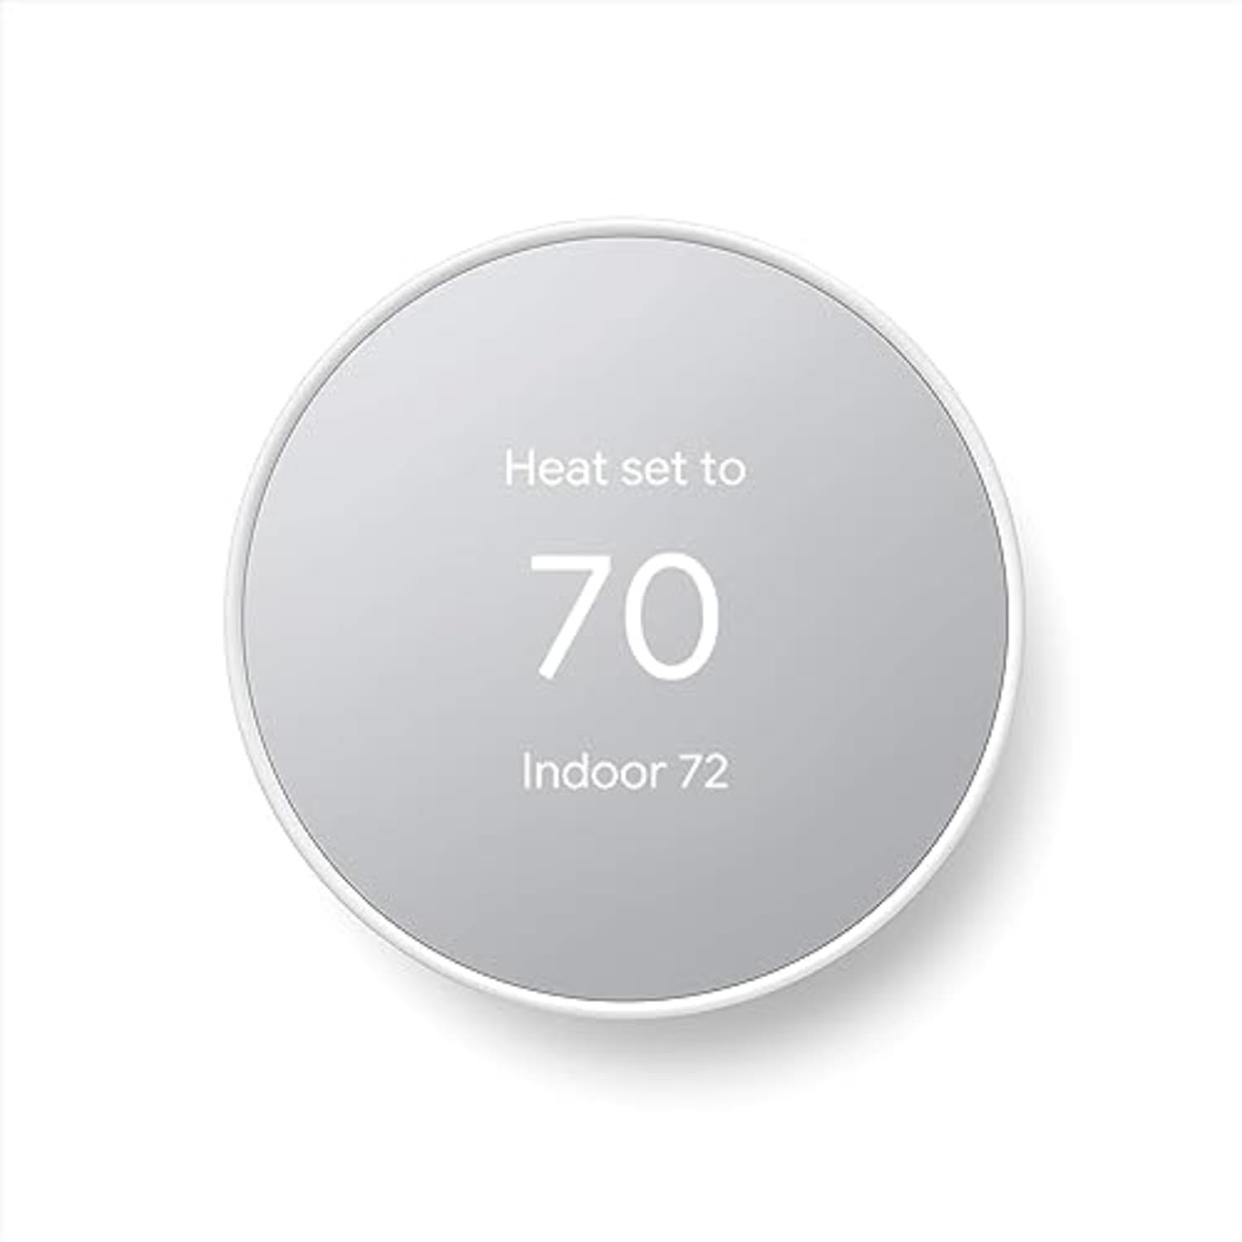 Google Nest Thermostat - Smart Thermostat for Home - Programmable Wifi Thermostat - Snow (AMAZON)